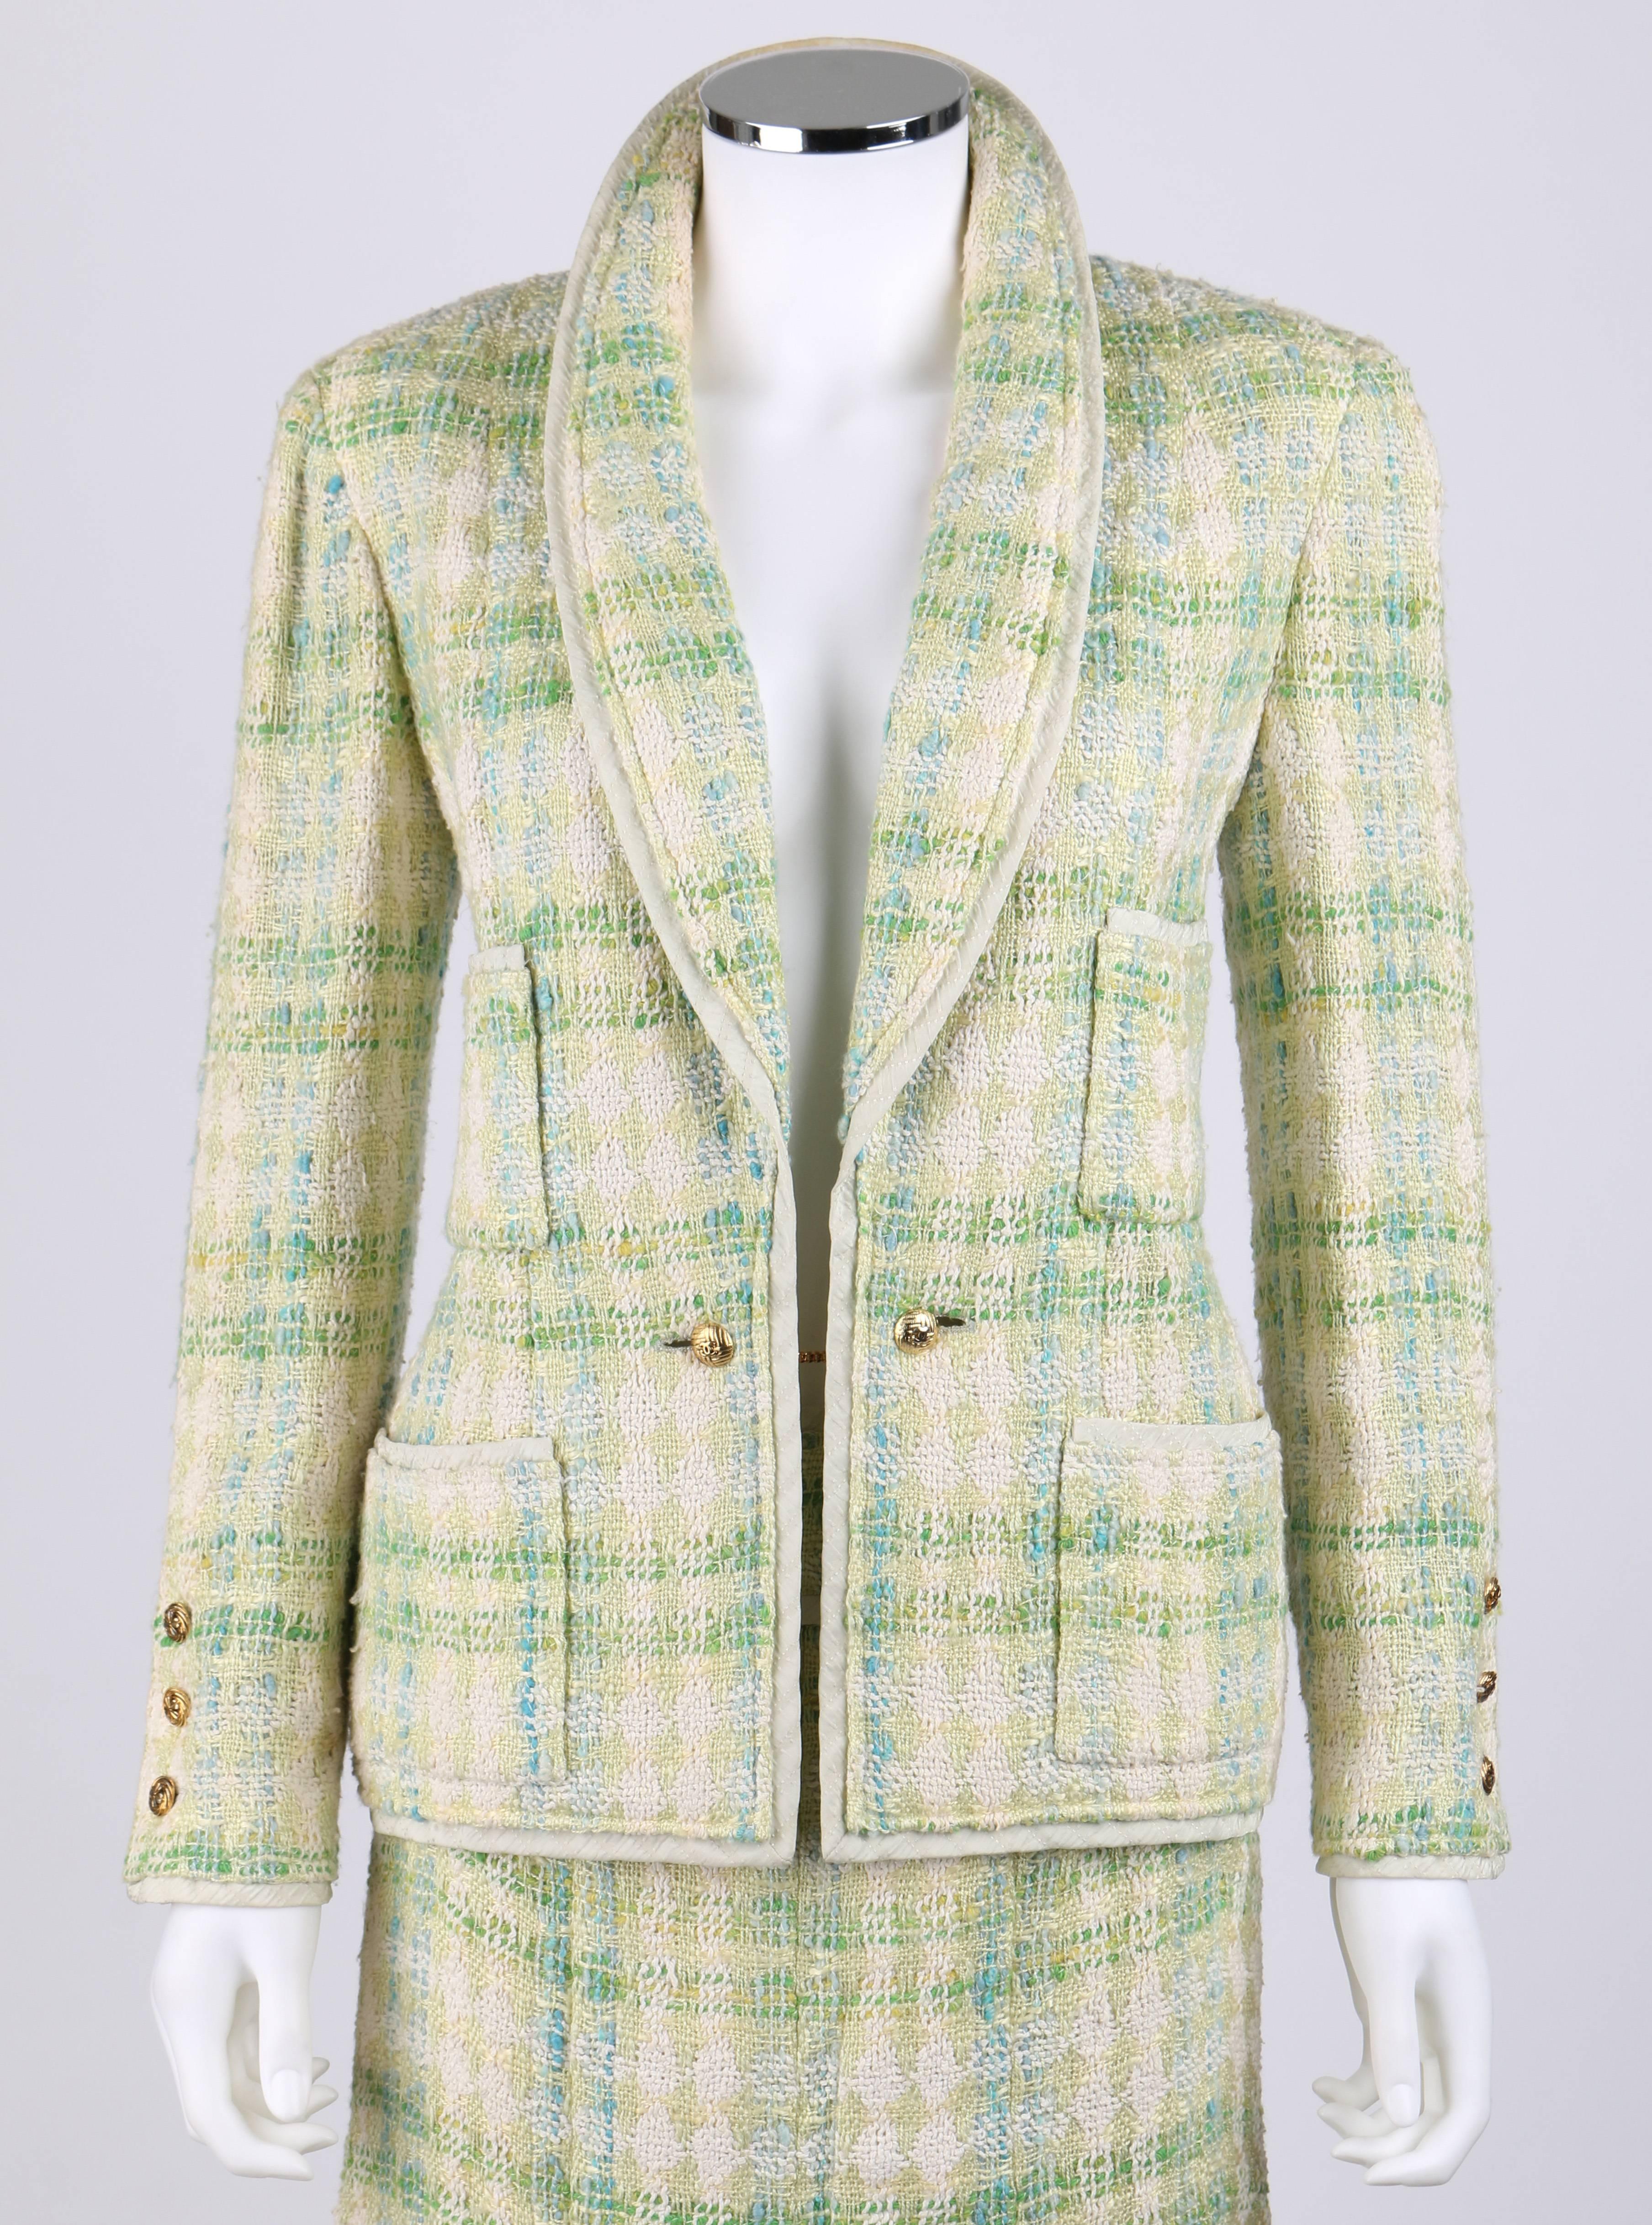 Vintage Chanel Boutique Spring/Summer 1984 two piece tweed skirt suit in shades of pale green, teal and ivory. The jacket is trimmed in textured pale green silk. Four patch pockets. Closes at front with gold-tone 